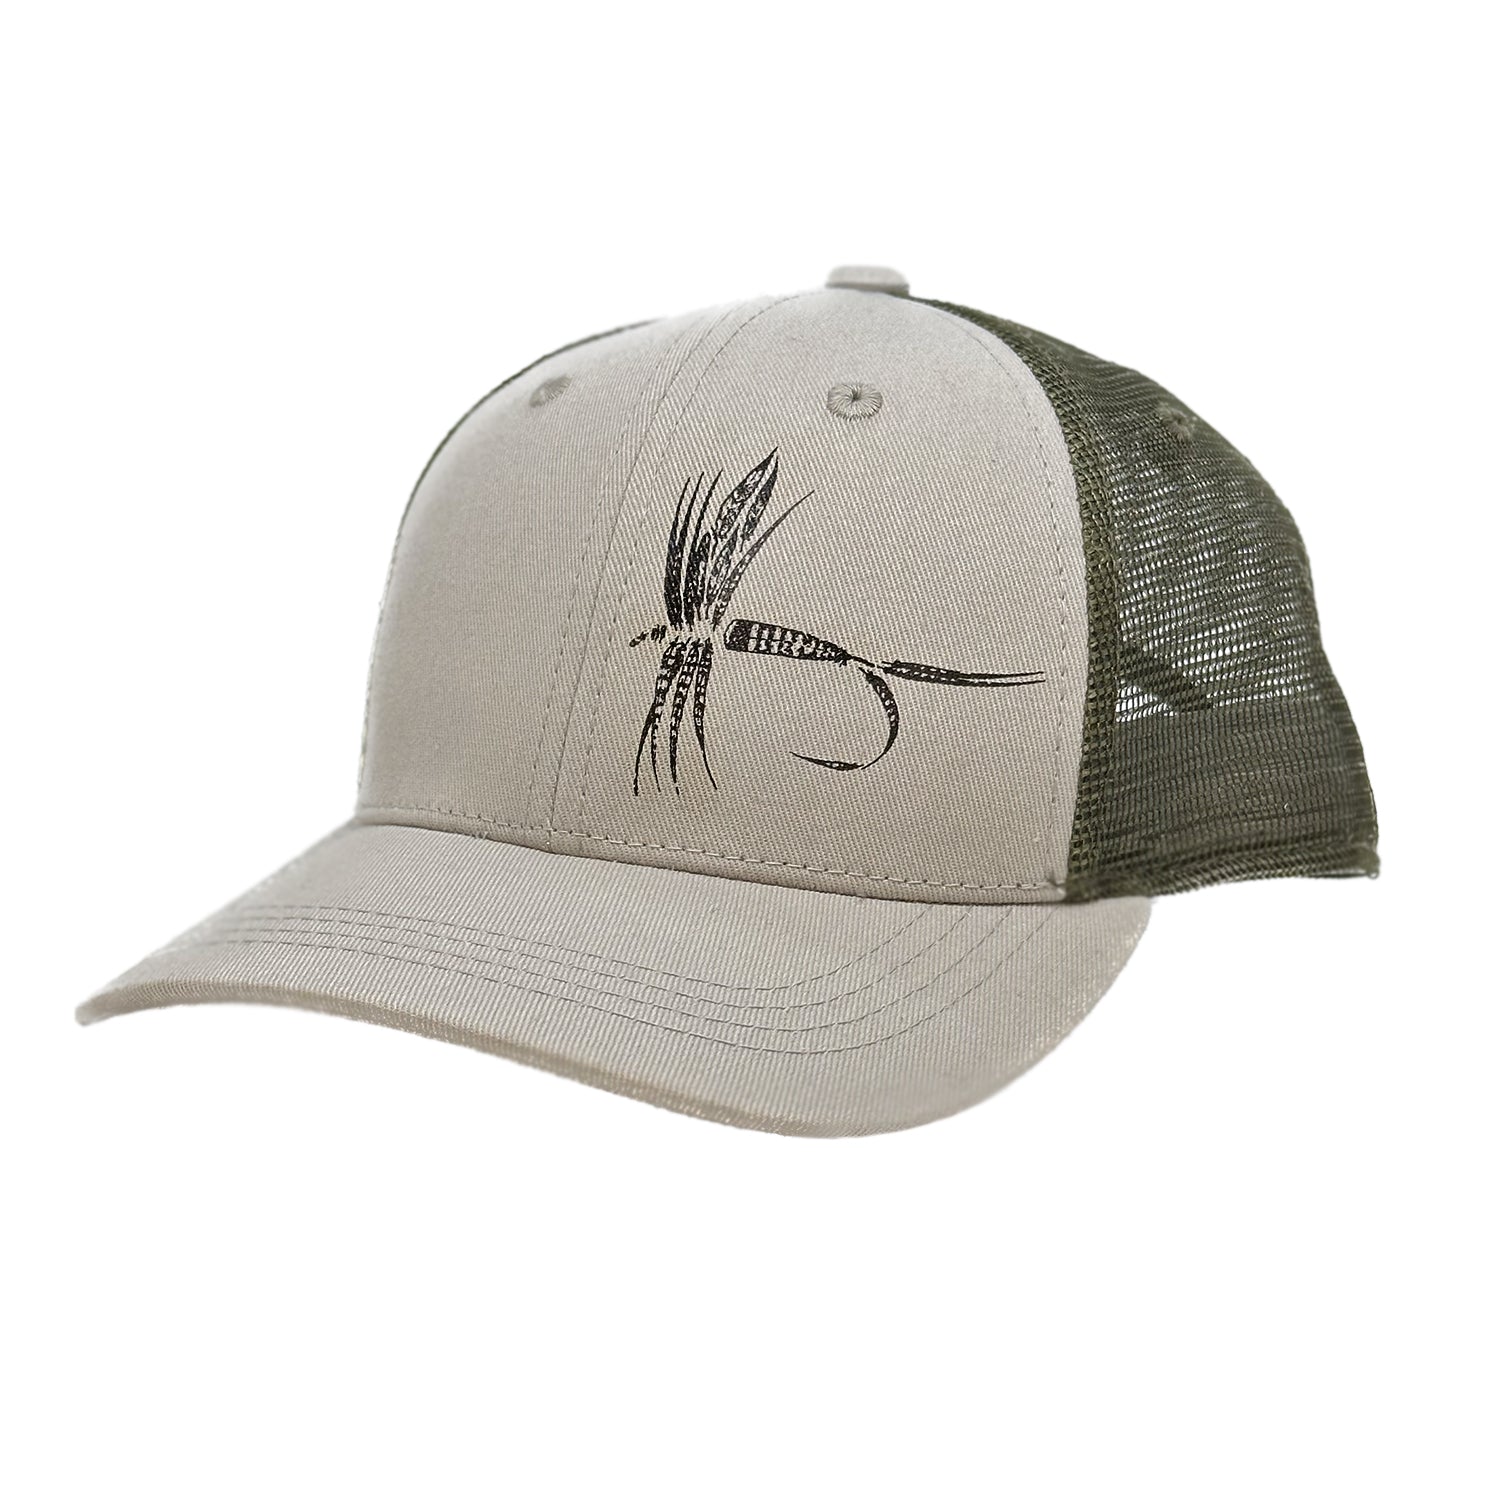 A gray front hat with dark forest green mesh with a Dry fly design on the right panel of that that is made of feathers